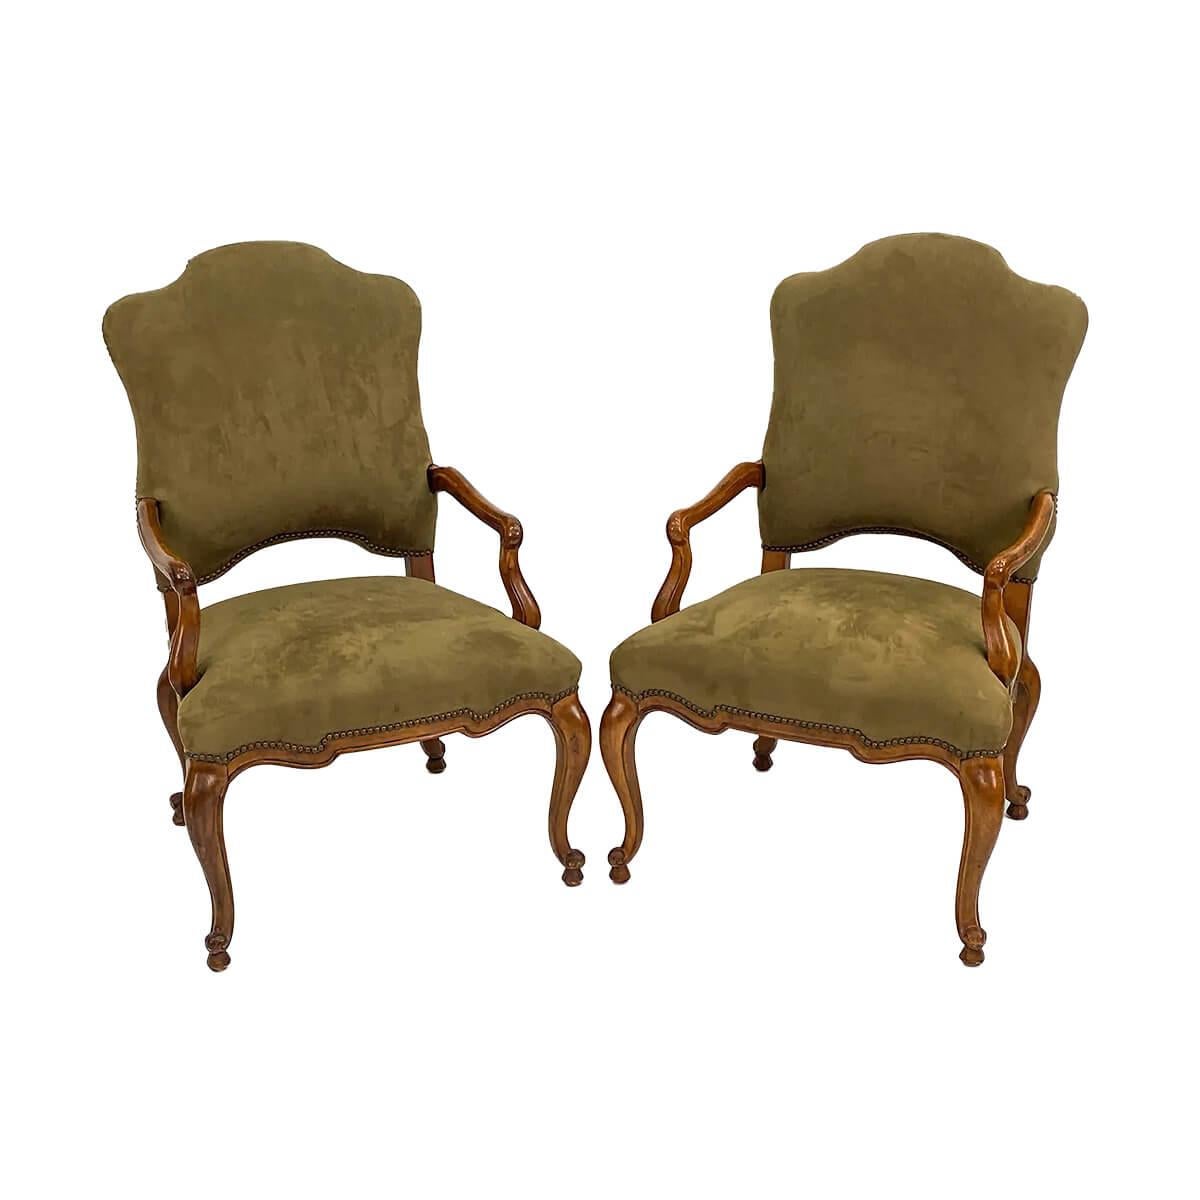 In the 18th century French Louis XV style. A large pair of carved Fauteuils with suede upholstered cushion backrest and seat. With a serpentine top rail and front, with brass nailhead details and raised on carved cabriole legs. France, Mid 20th